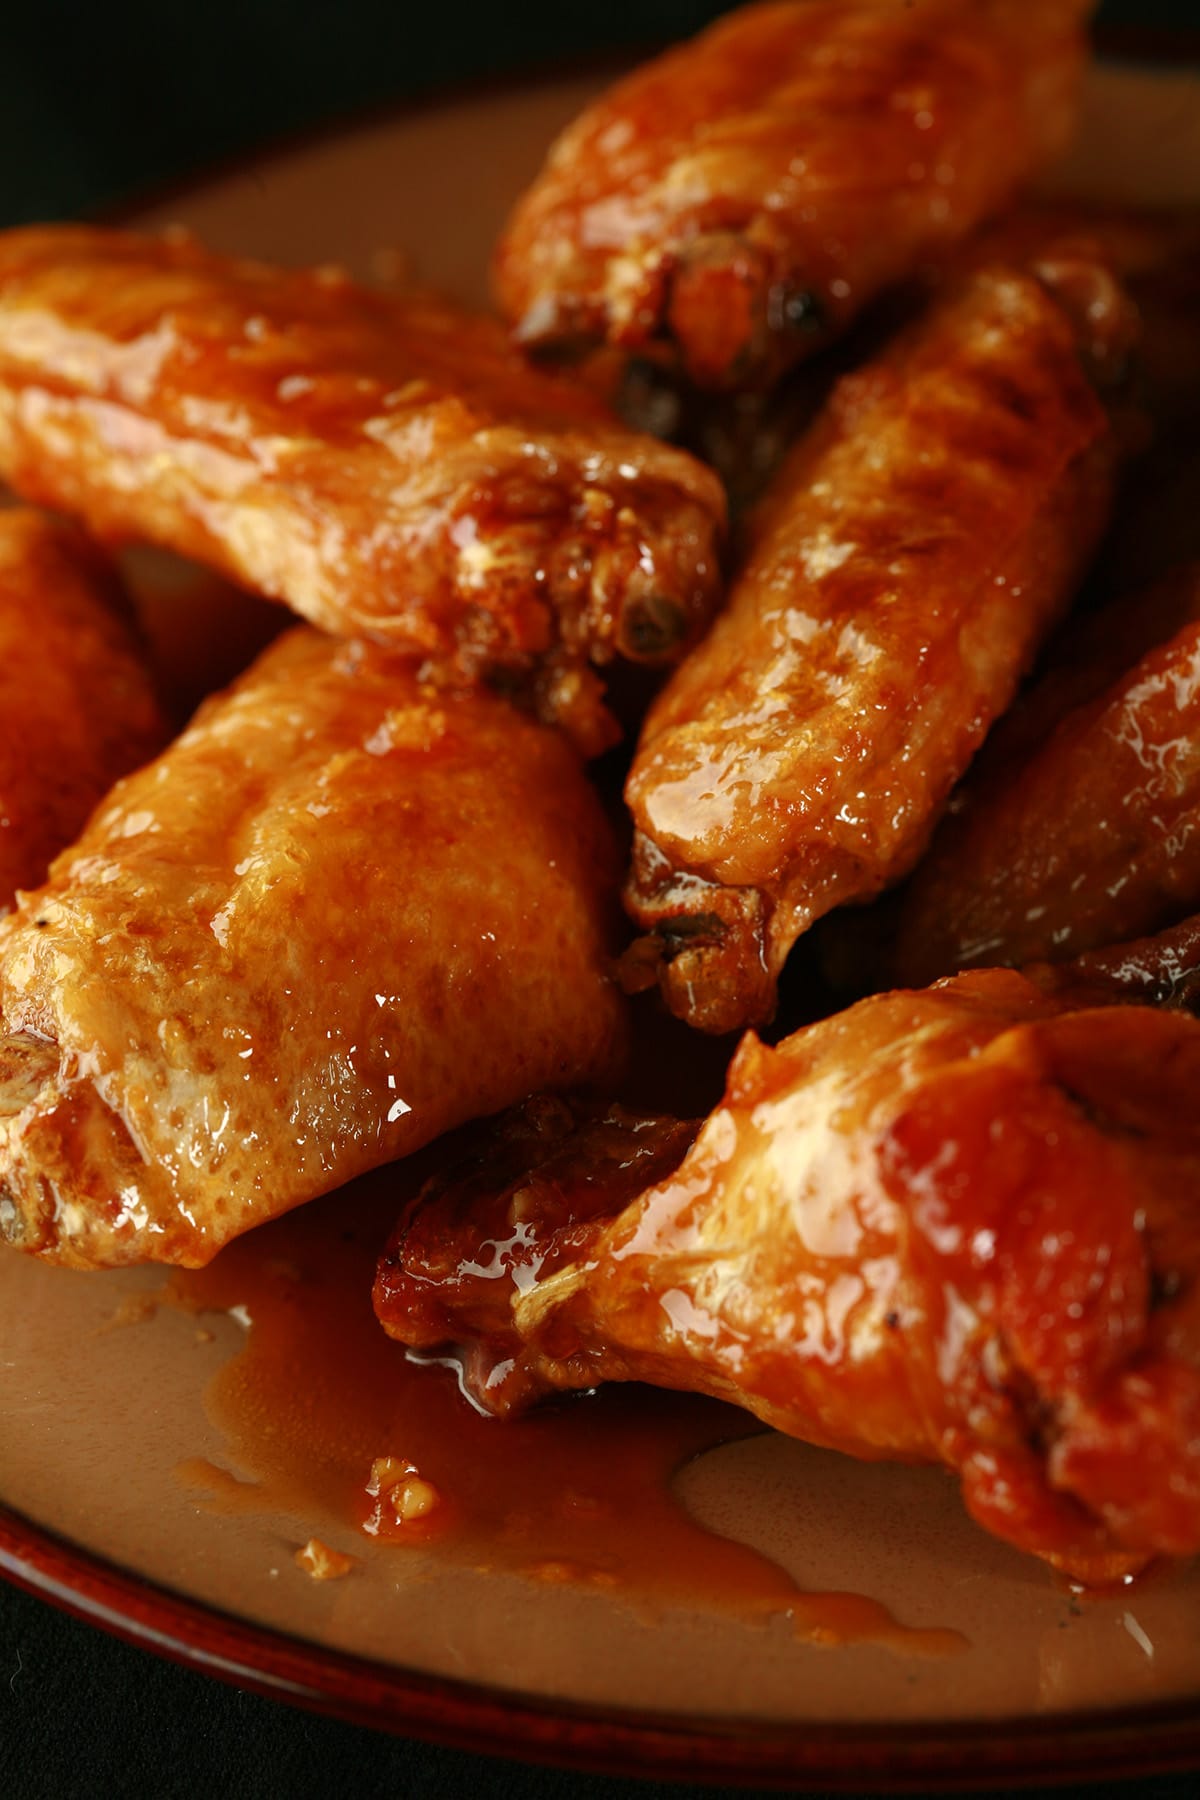 A close up view of a pile of honey garlic wings on a small brown plate.